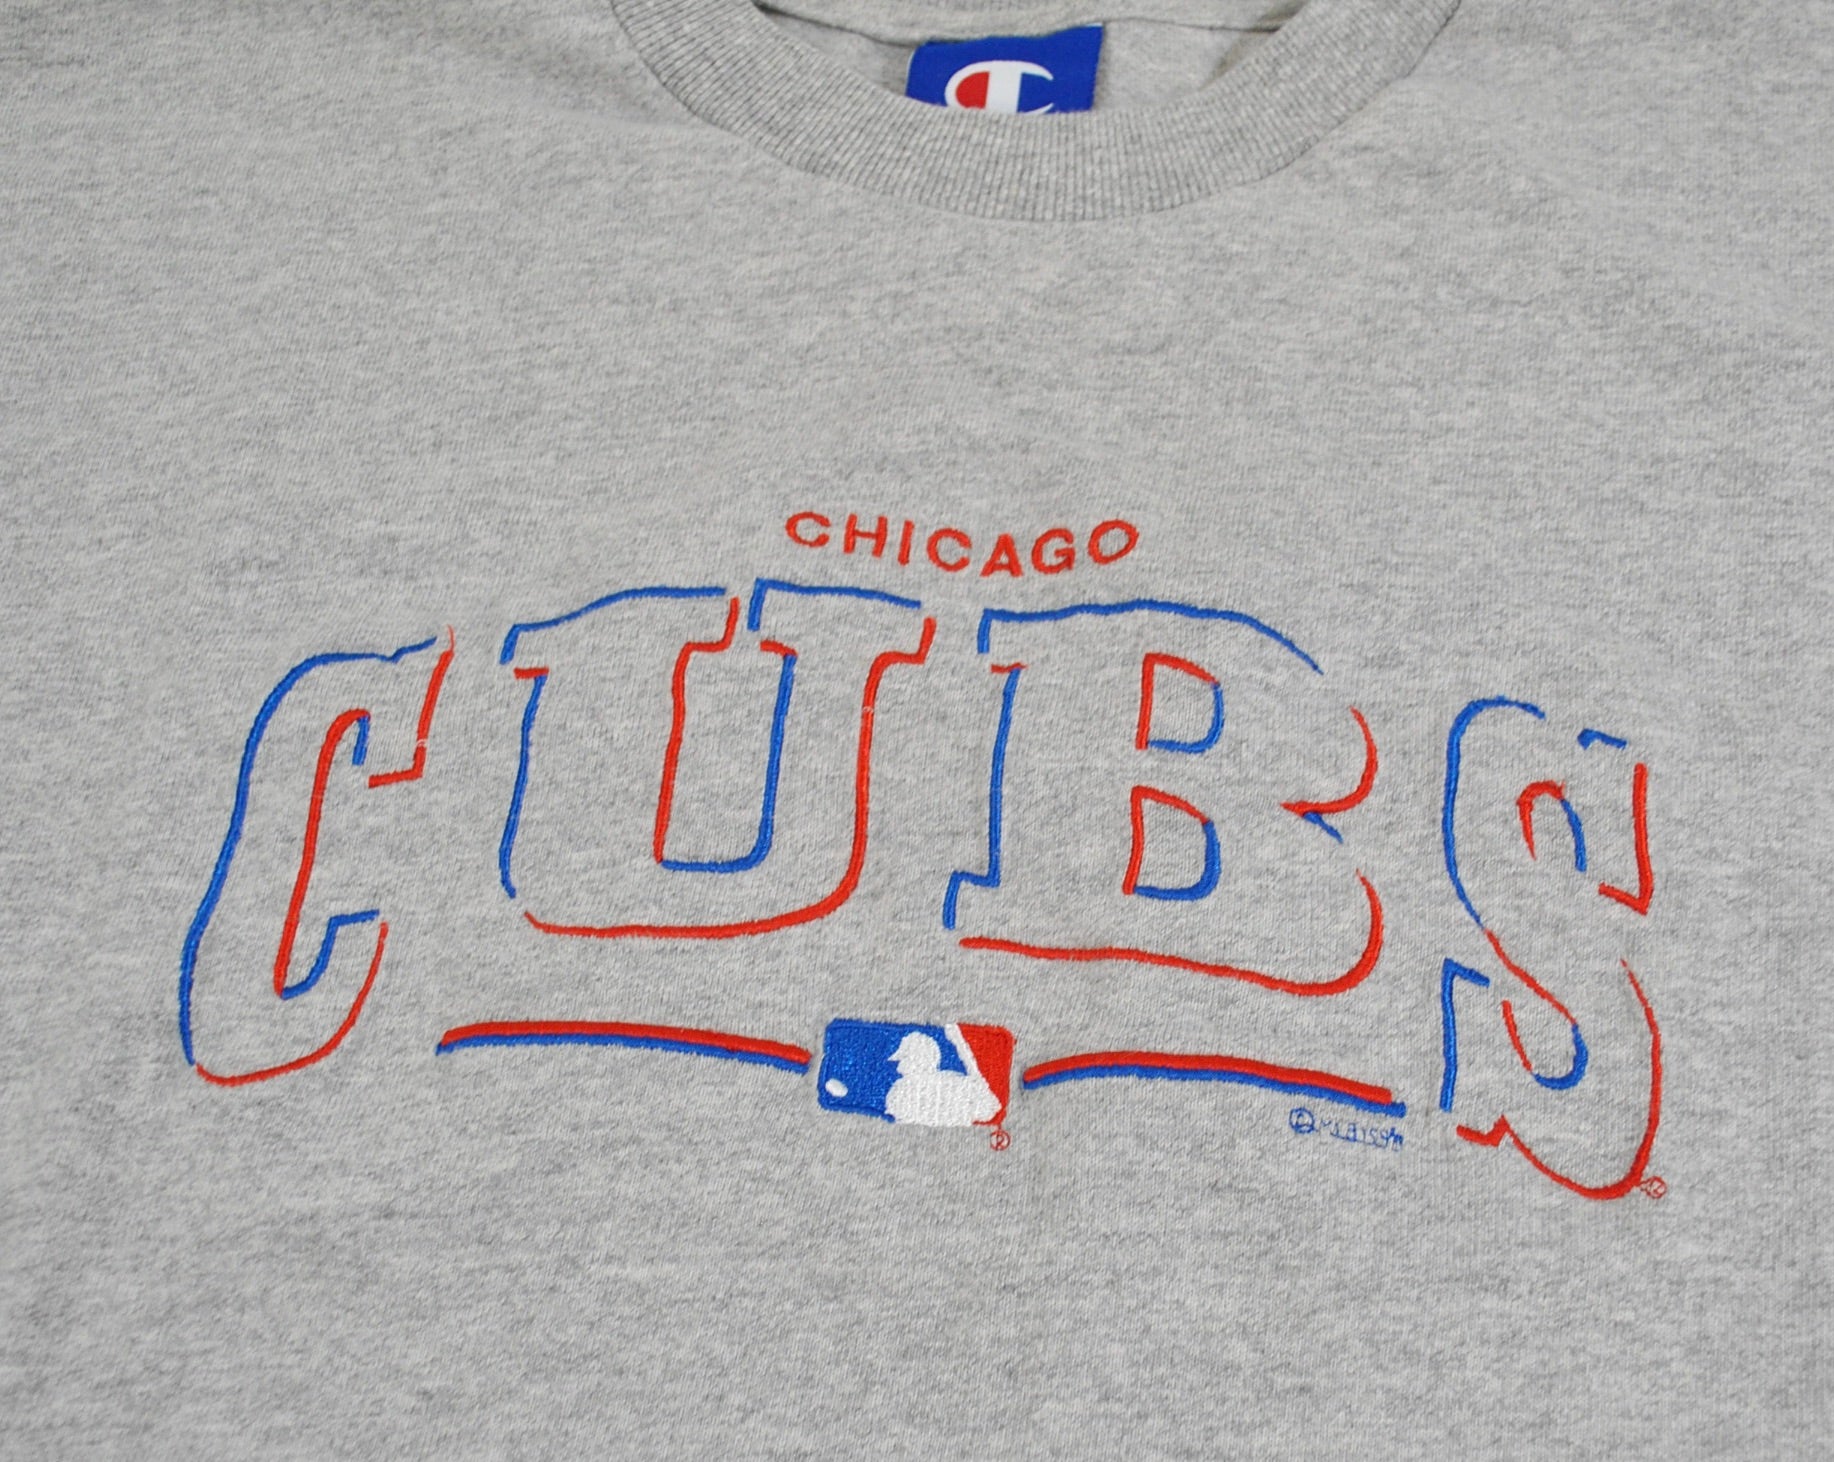 Vintage Chicago Cubs Graphic T-Shirt